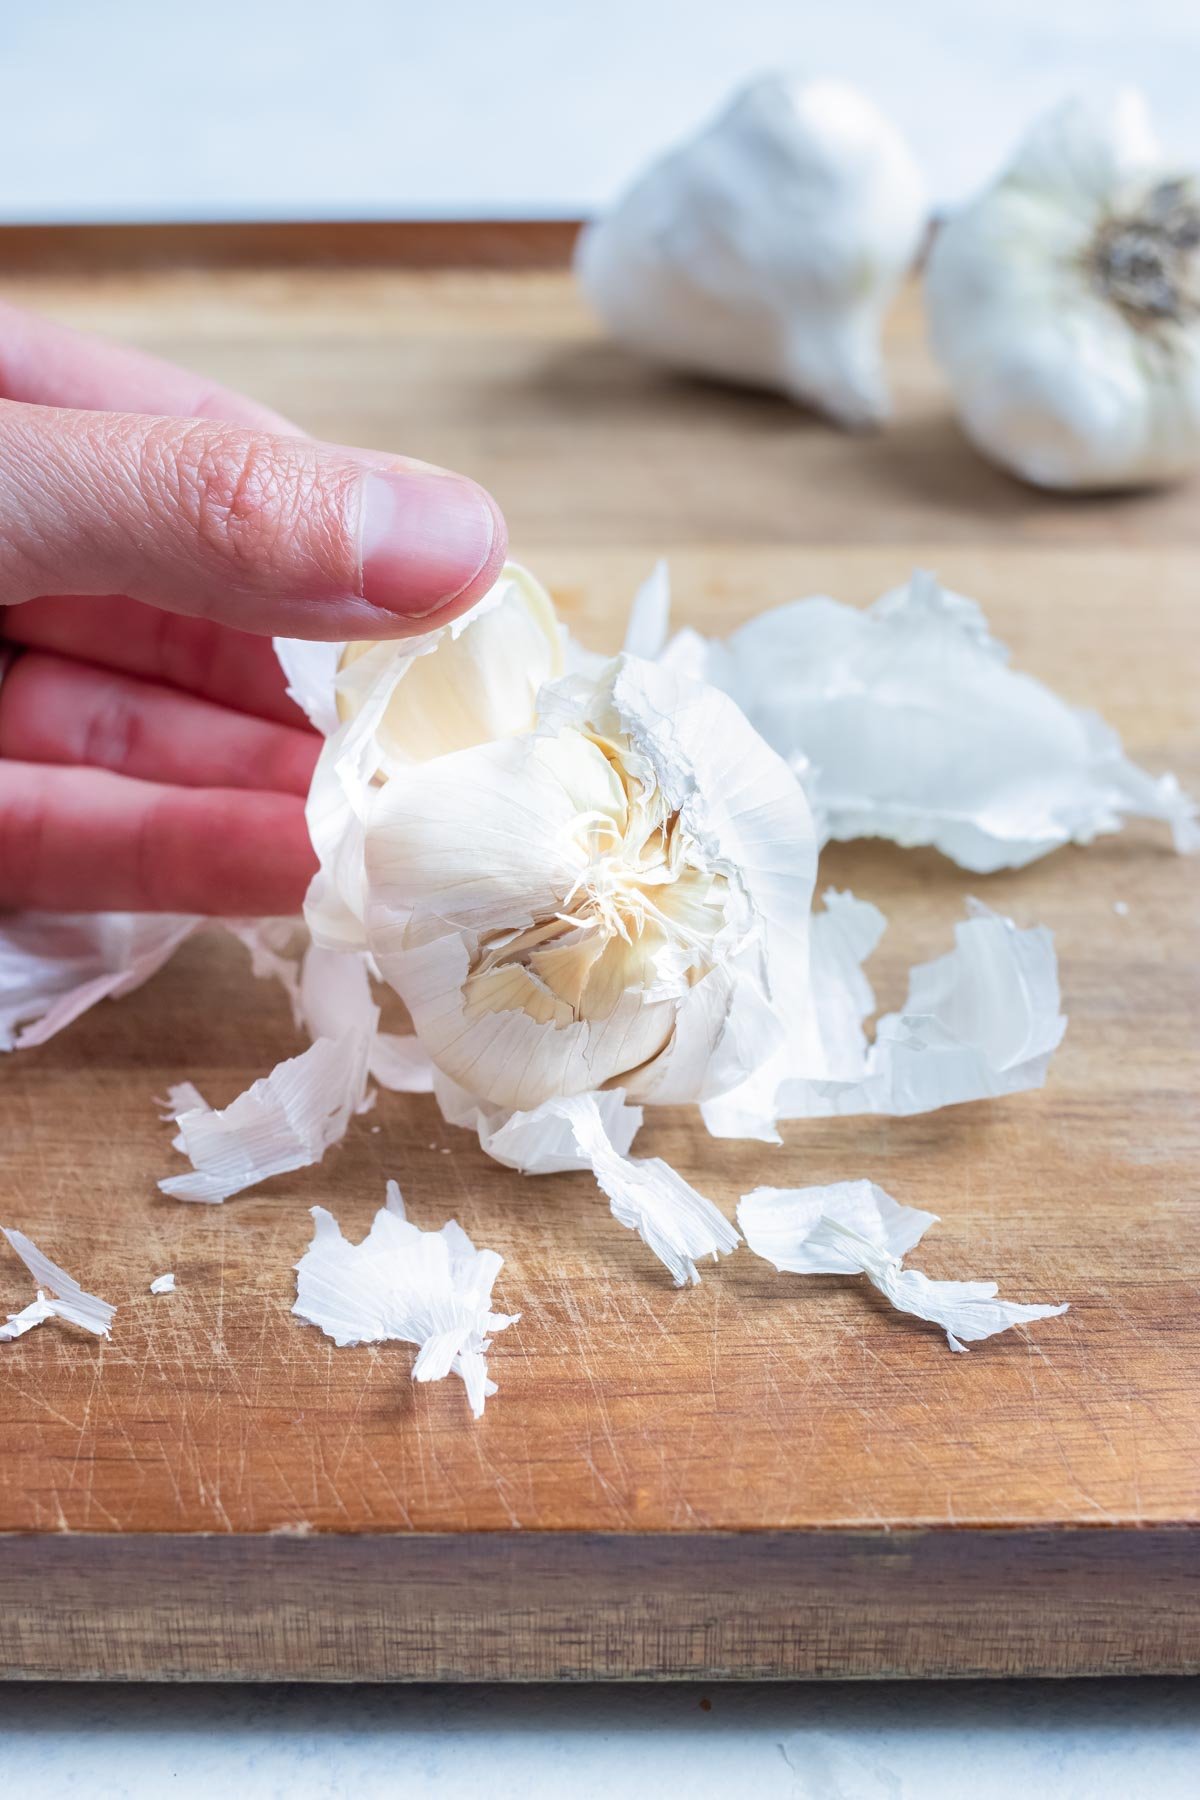 The skin is removed from the whole garlic bulb.